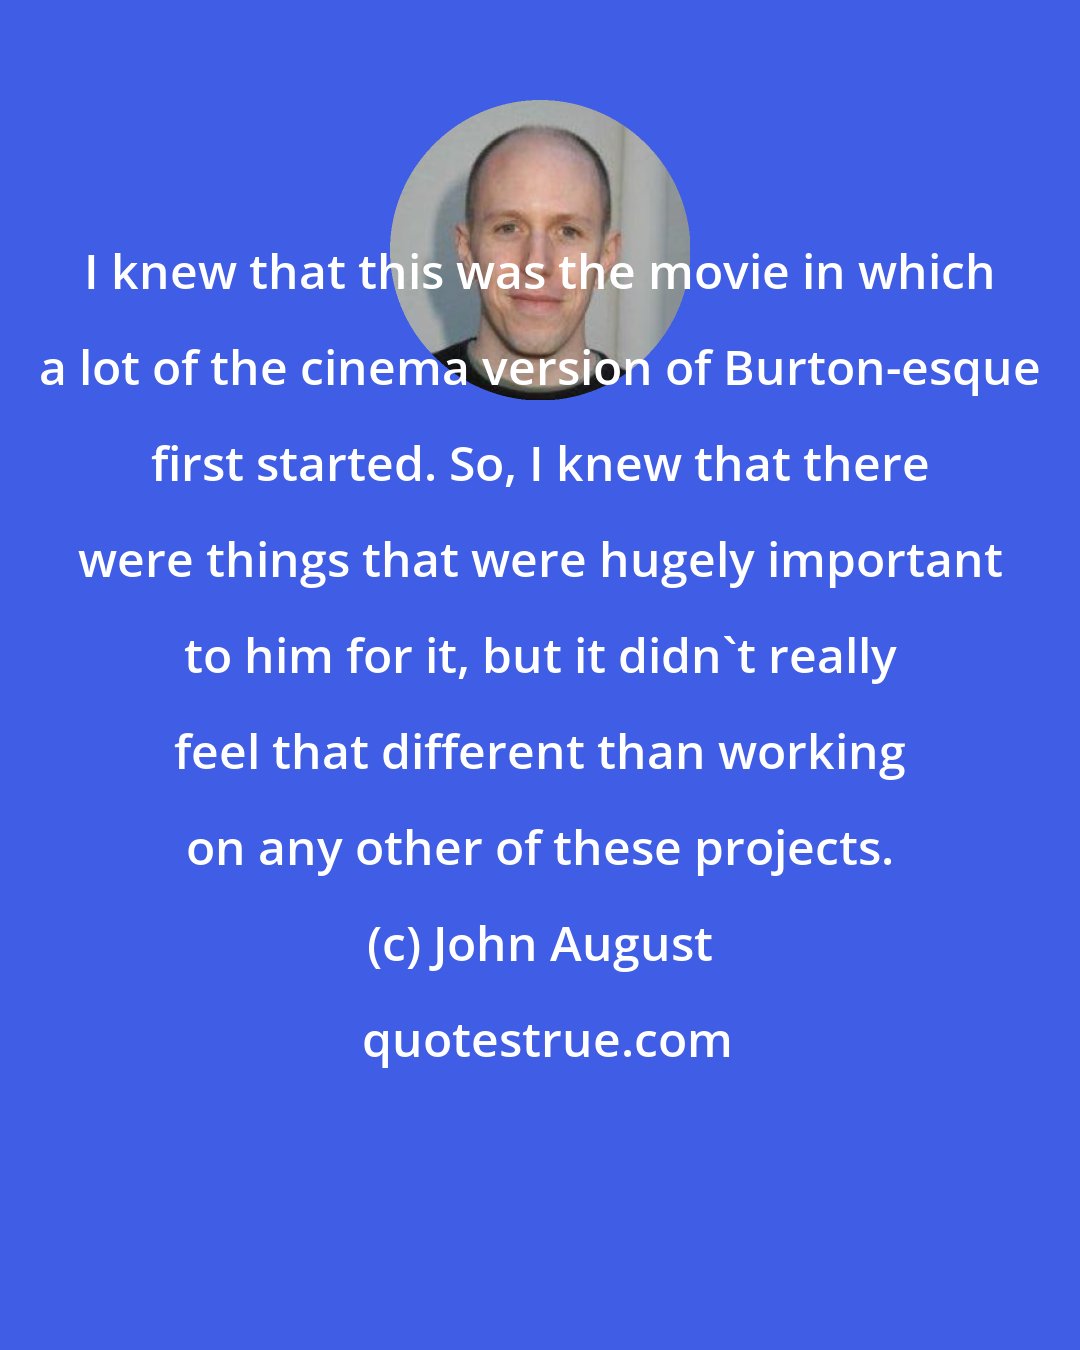 John August: I knew that this was the movie in which a lot of the cinema version of Burton-esque first started. So, I knew that there were things that were hugely important to him for it, but it didn't really feel that different than working on any other of these projects.